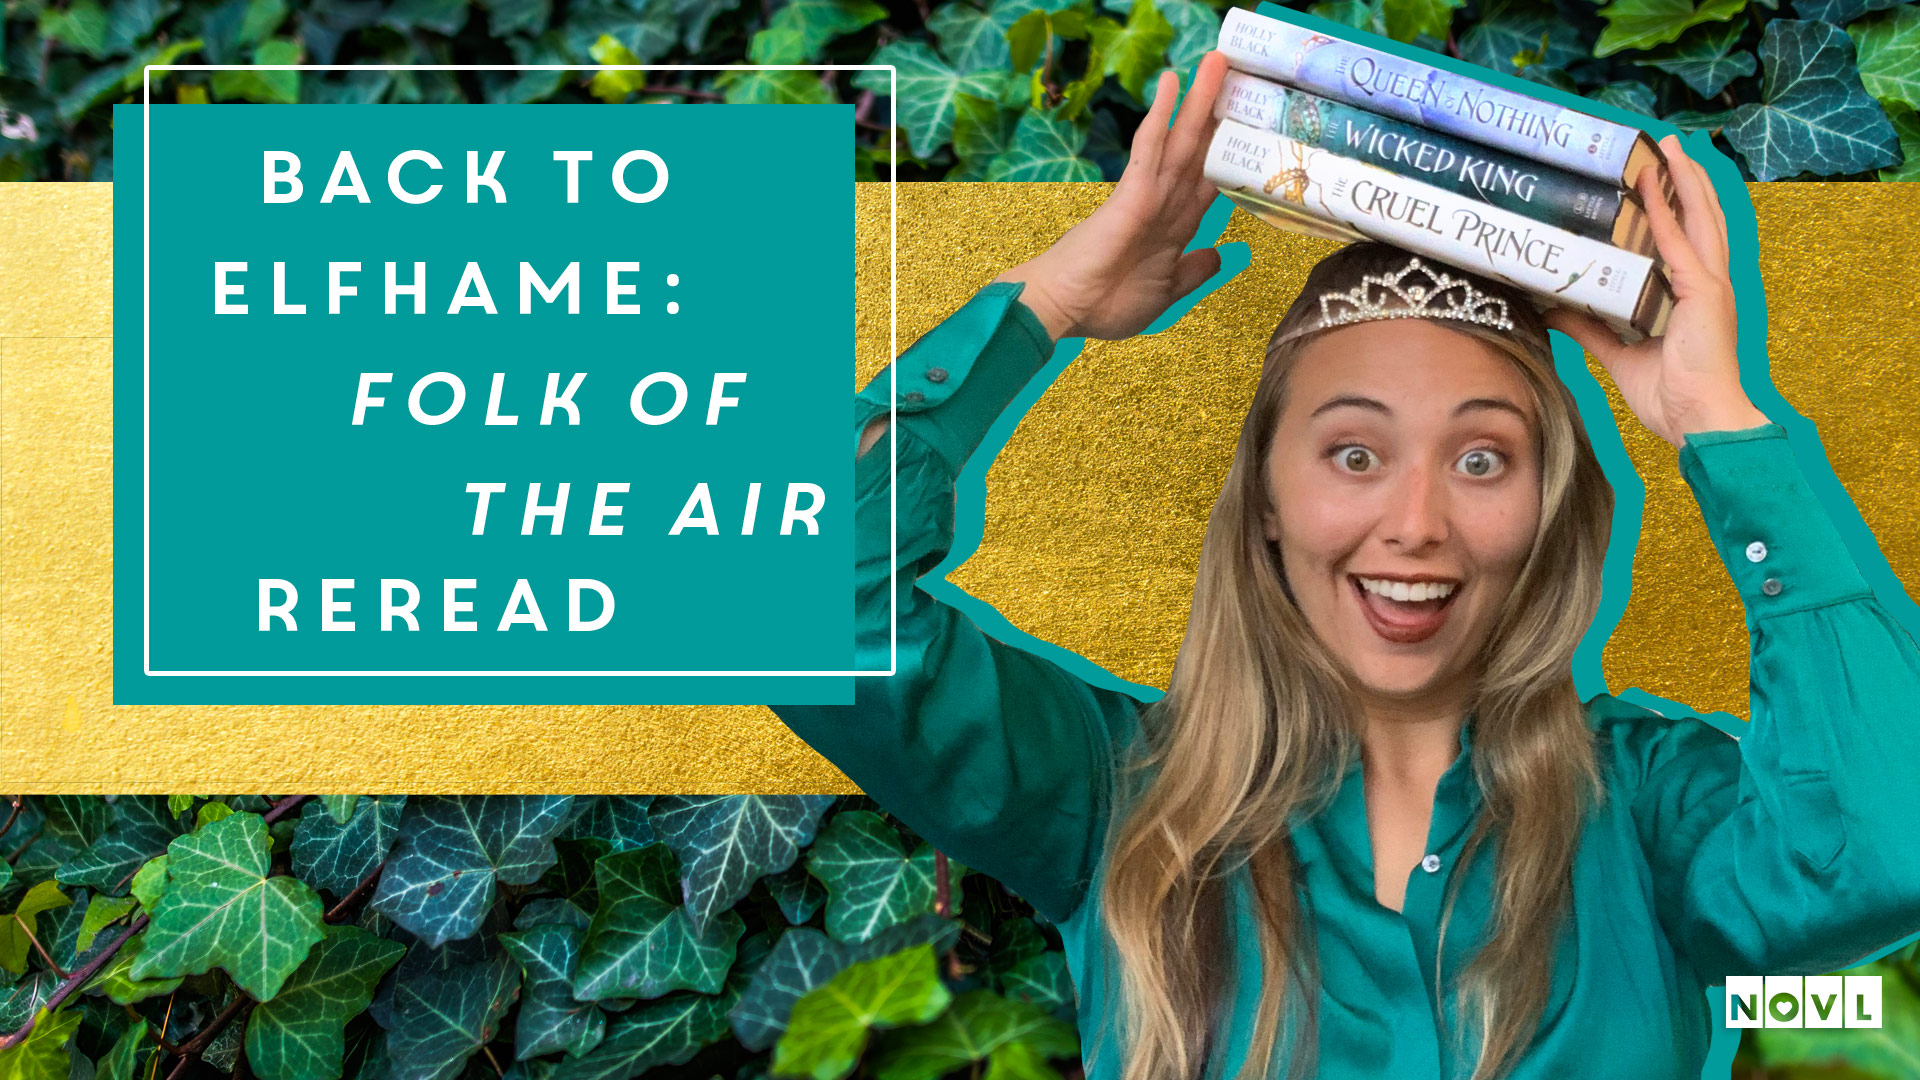 The NOVL Blog, Featured Image for Article: The Folk of the Air Reread